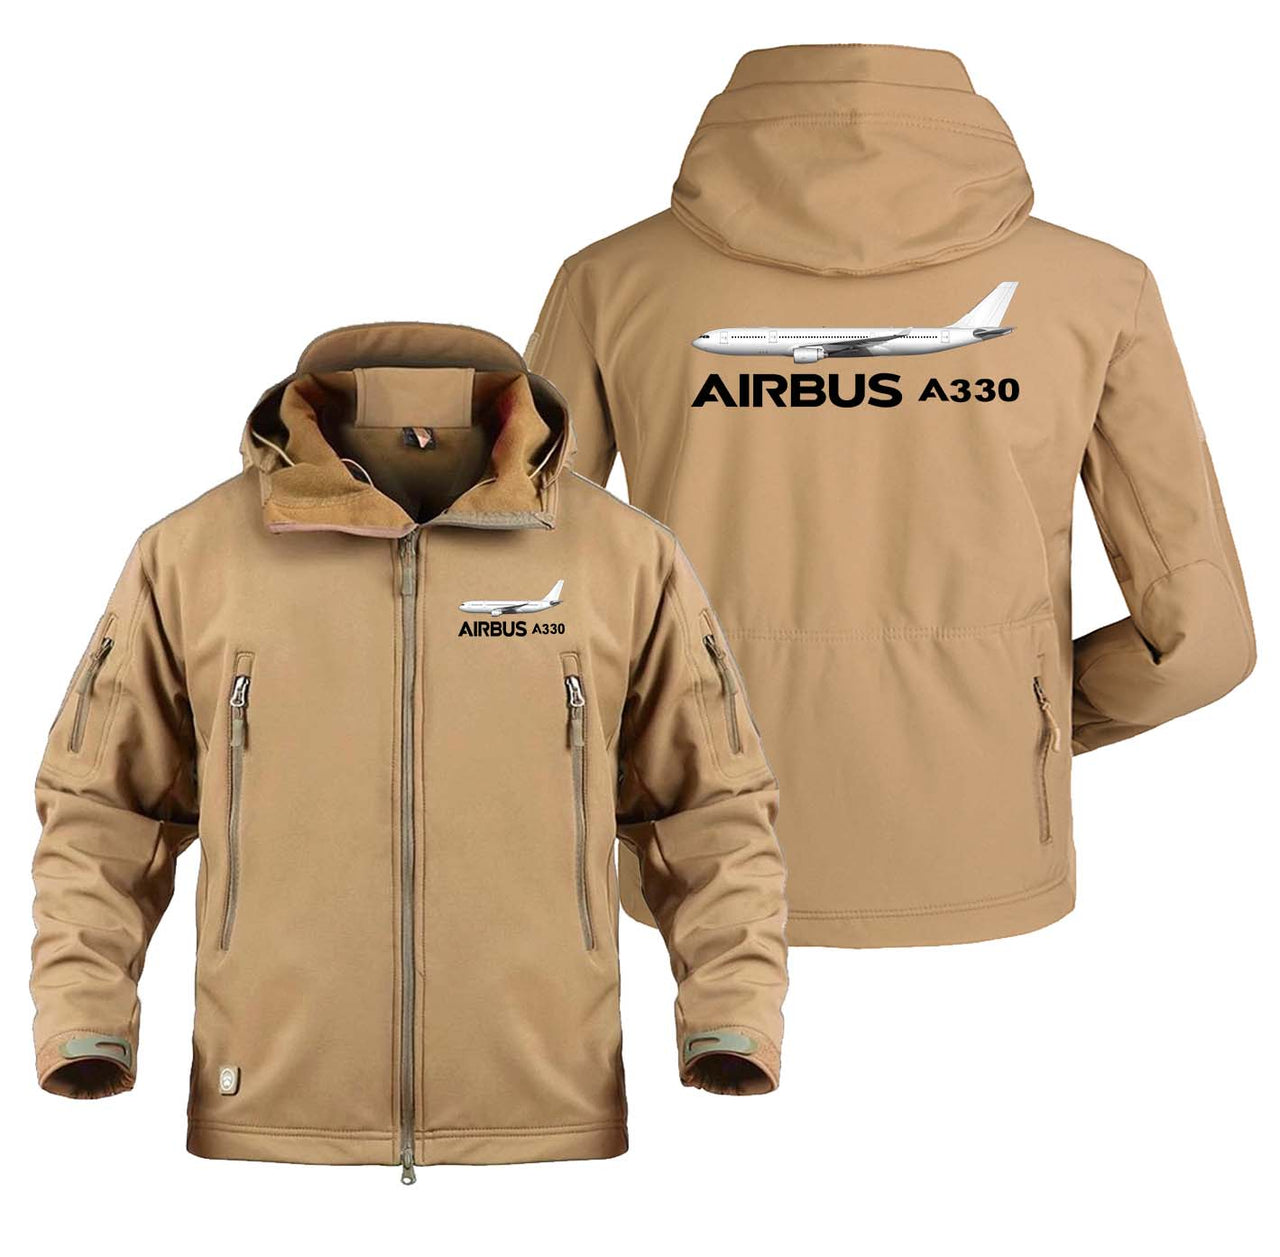 The Airbus A330 Designed Military Jackets (Customizable)